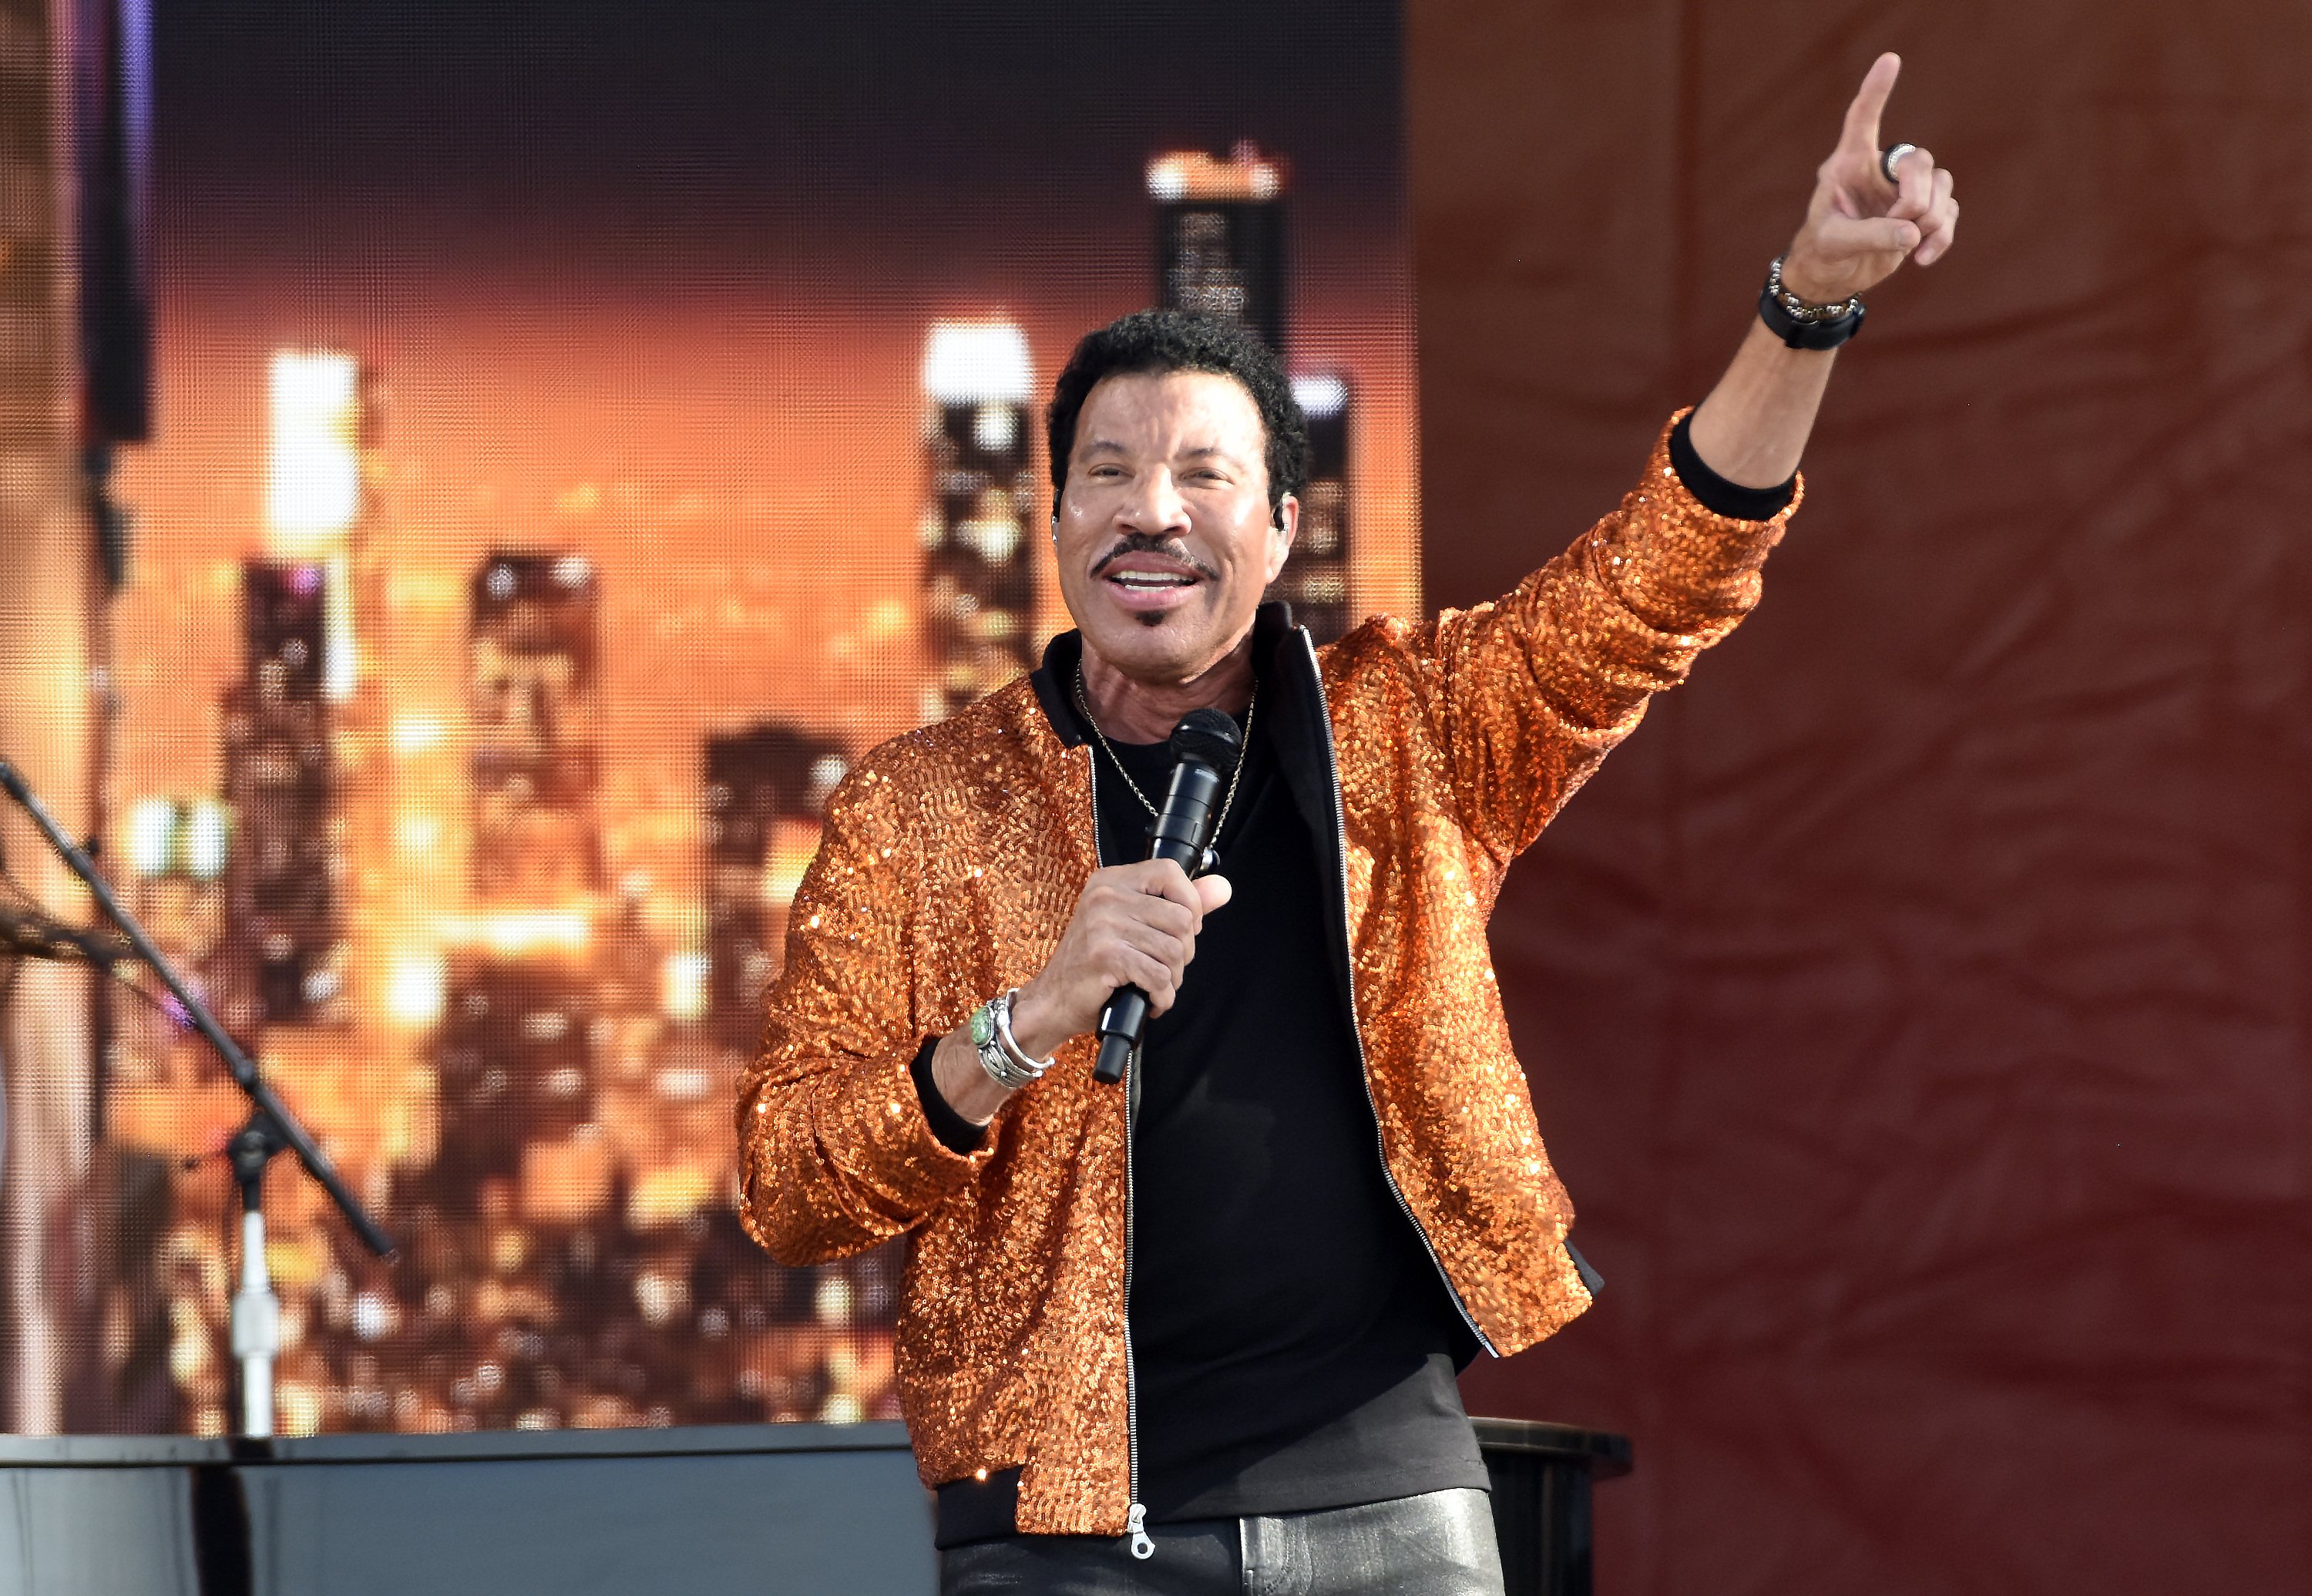 Lionel Richie performs during the 2022 New Orleans Jazz & Heritage Festival on April 29, 2022 | Source: Getty Images